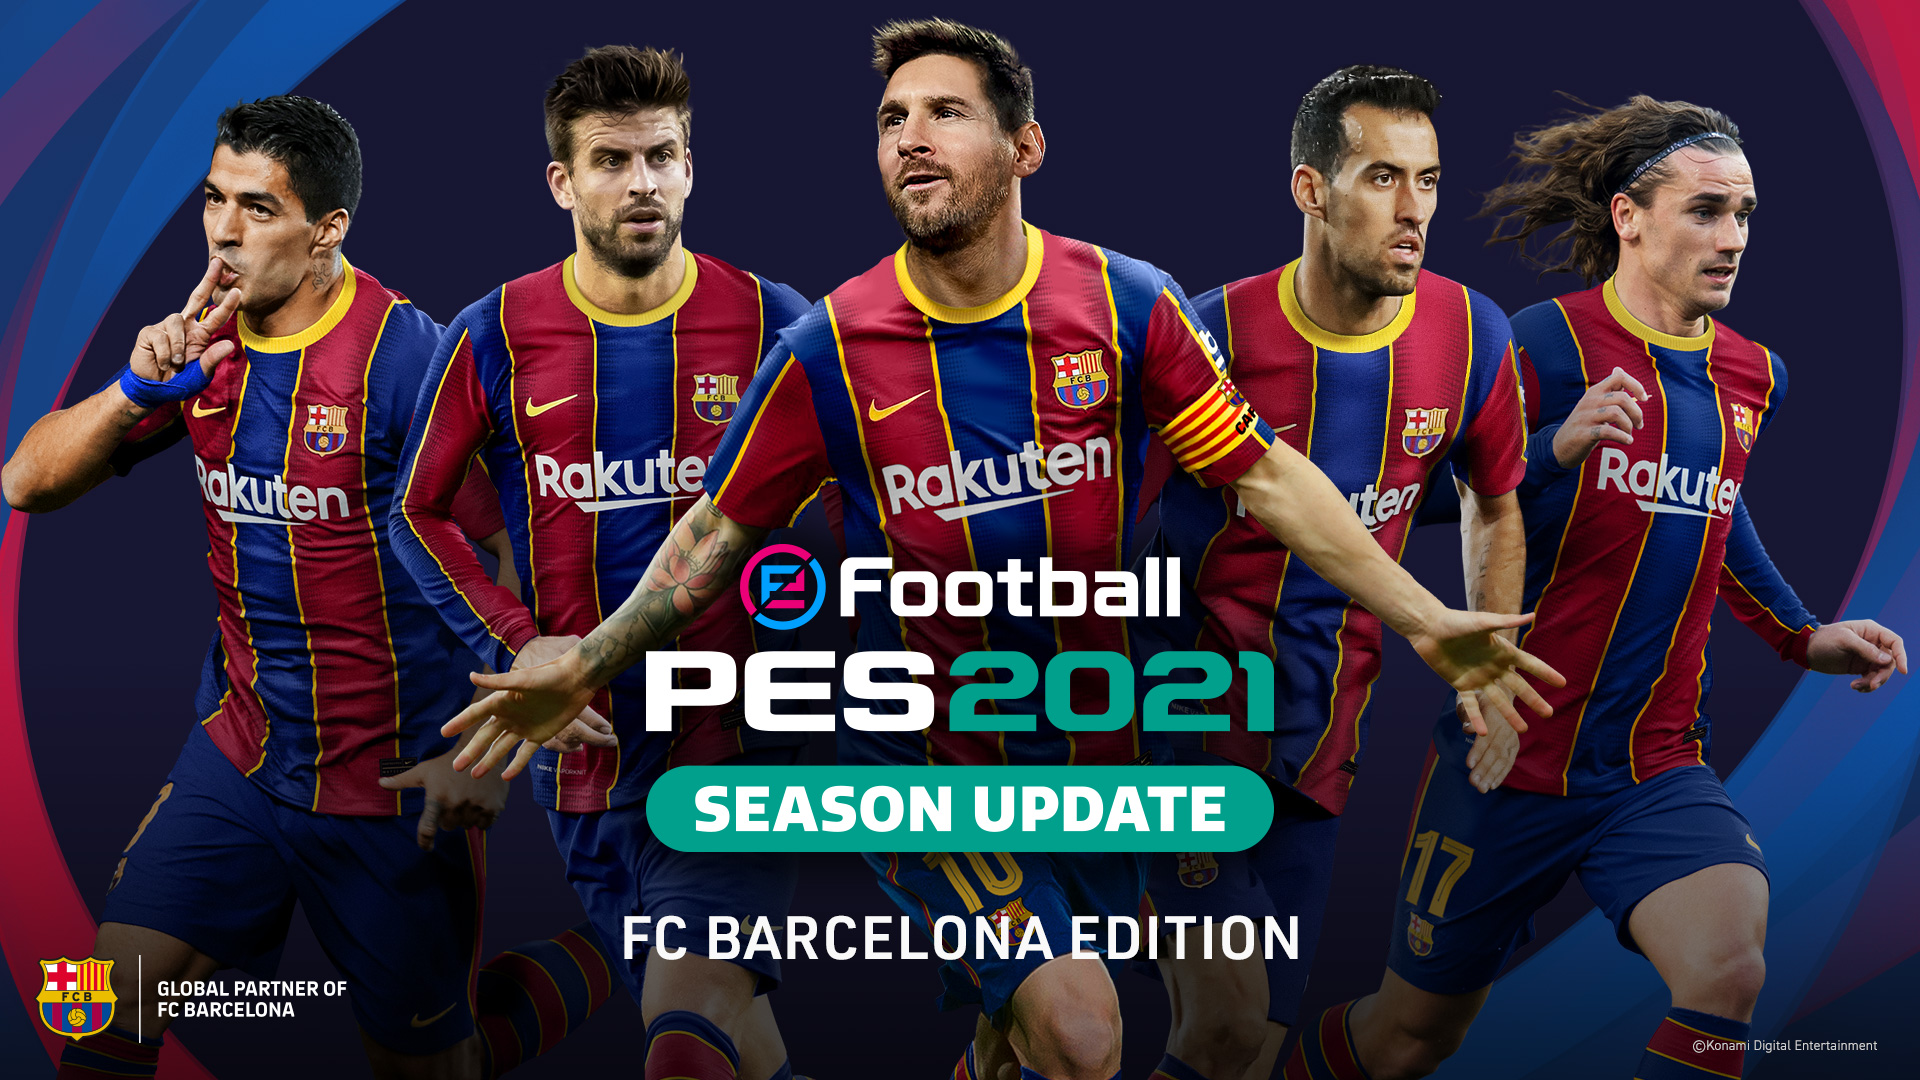 Season Update Wallpaper Pes 2021 : Product overview the  